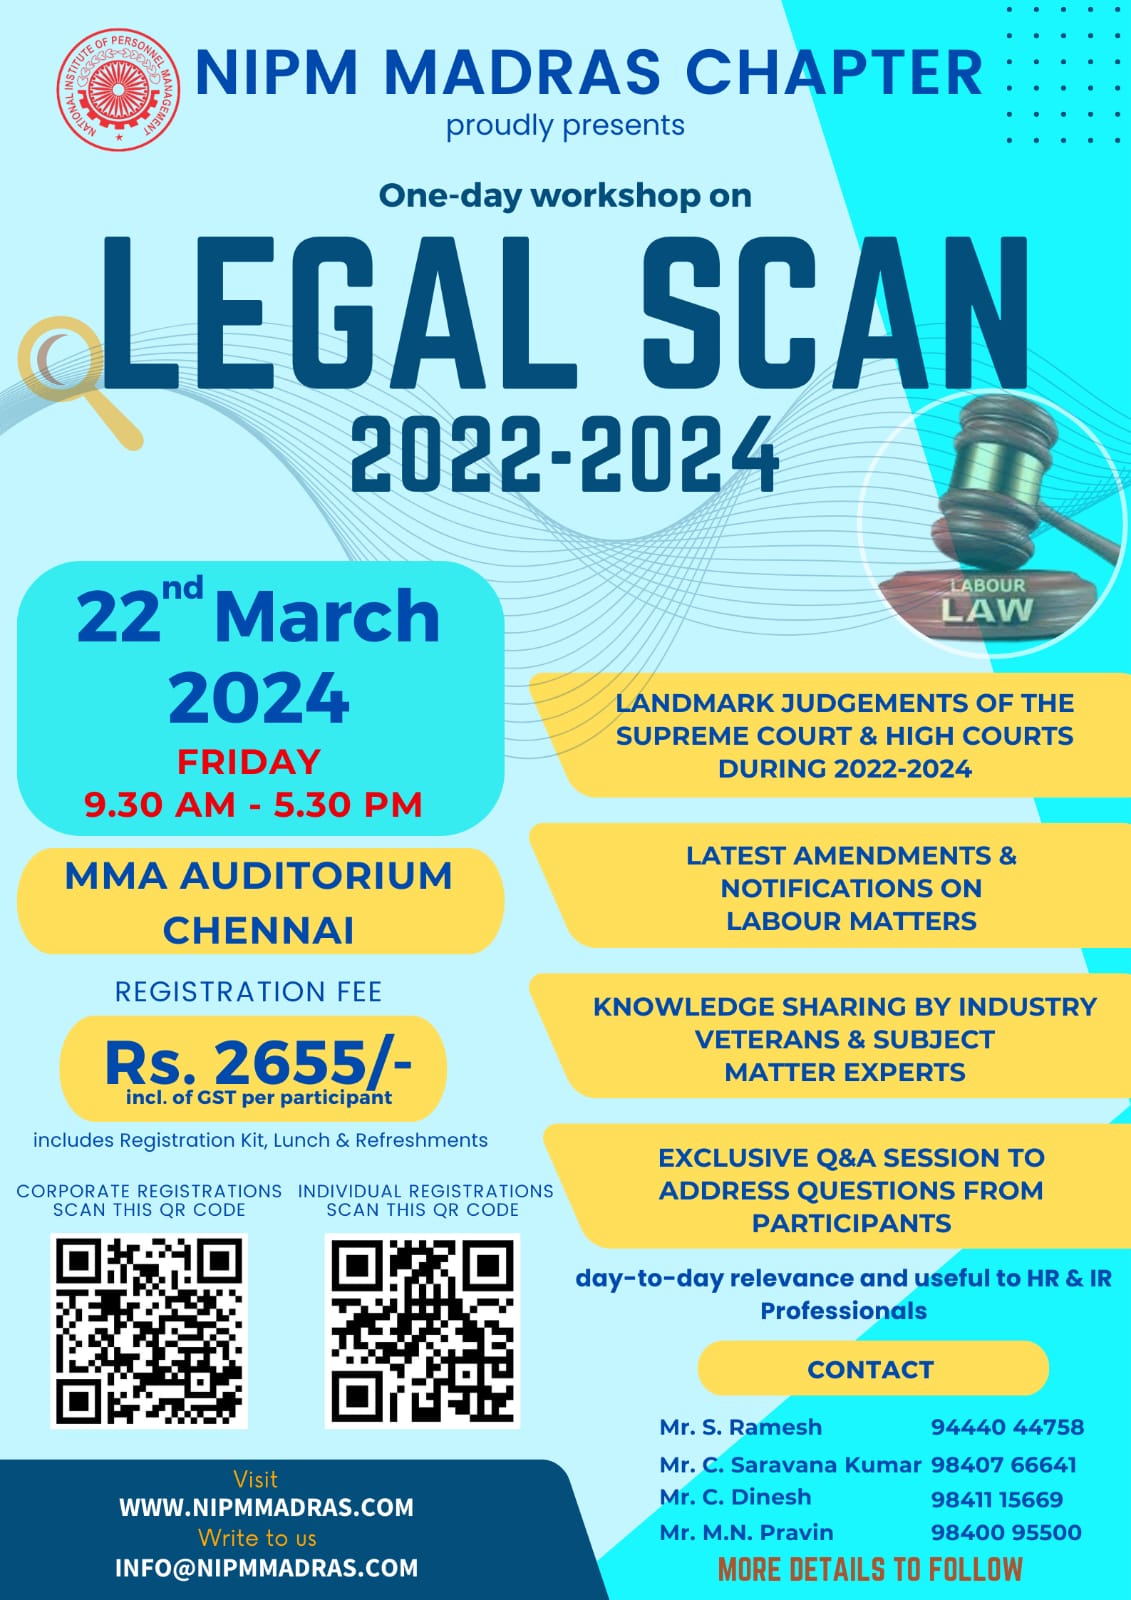 NIPM Madras Chapter is hosting a 1-day workshop on LEGAL SCAN 2022-2024 on March 22nd 2024 at the MMA Auditorium, Chennai